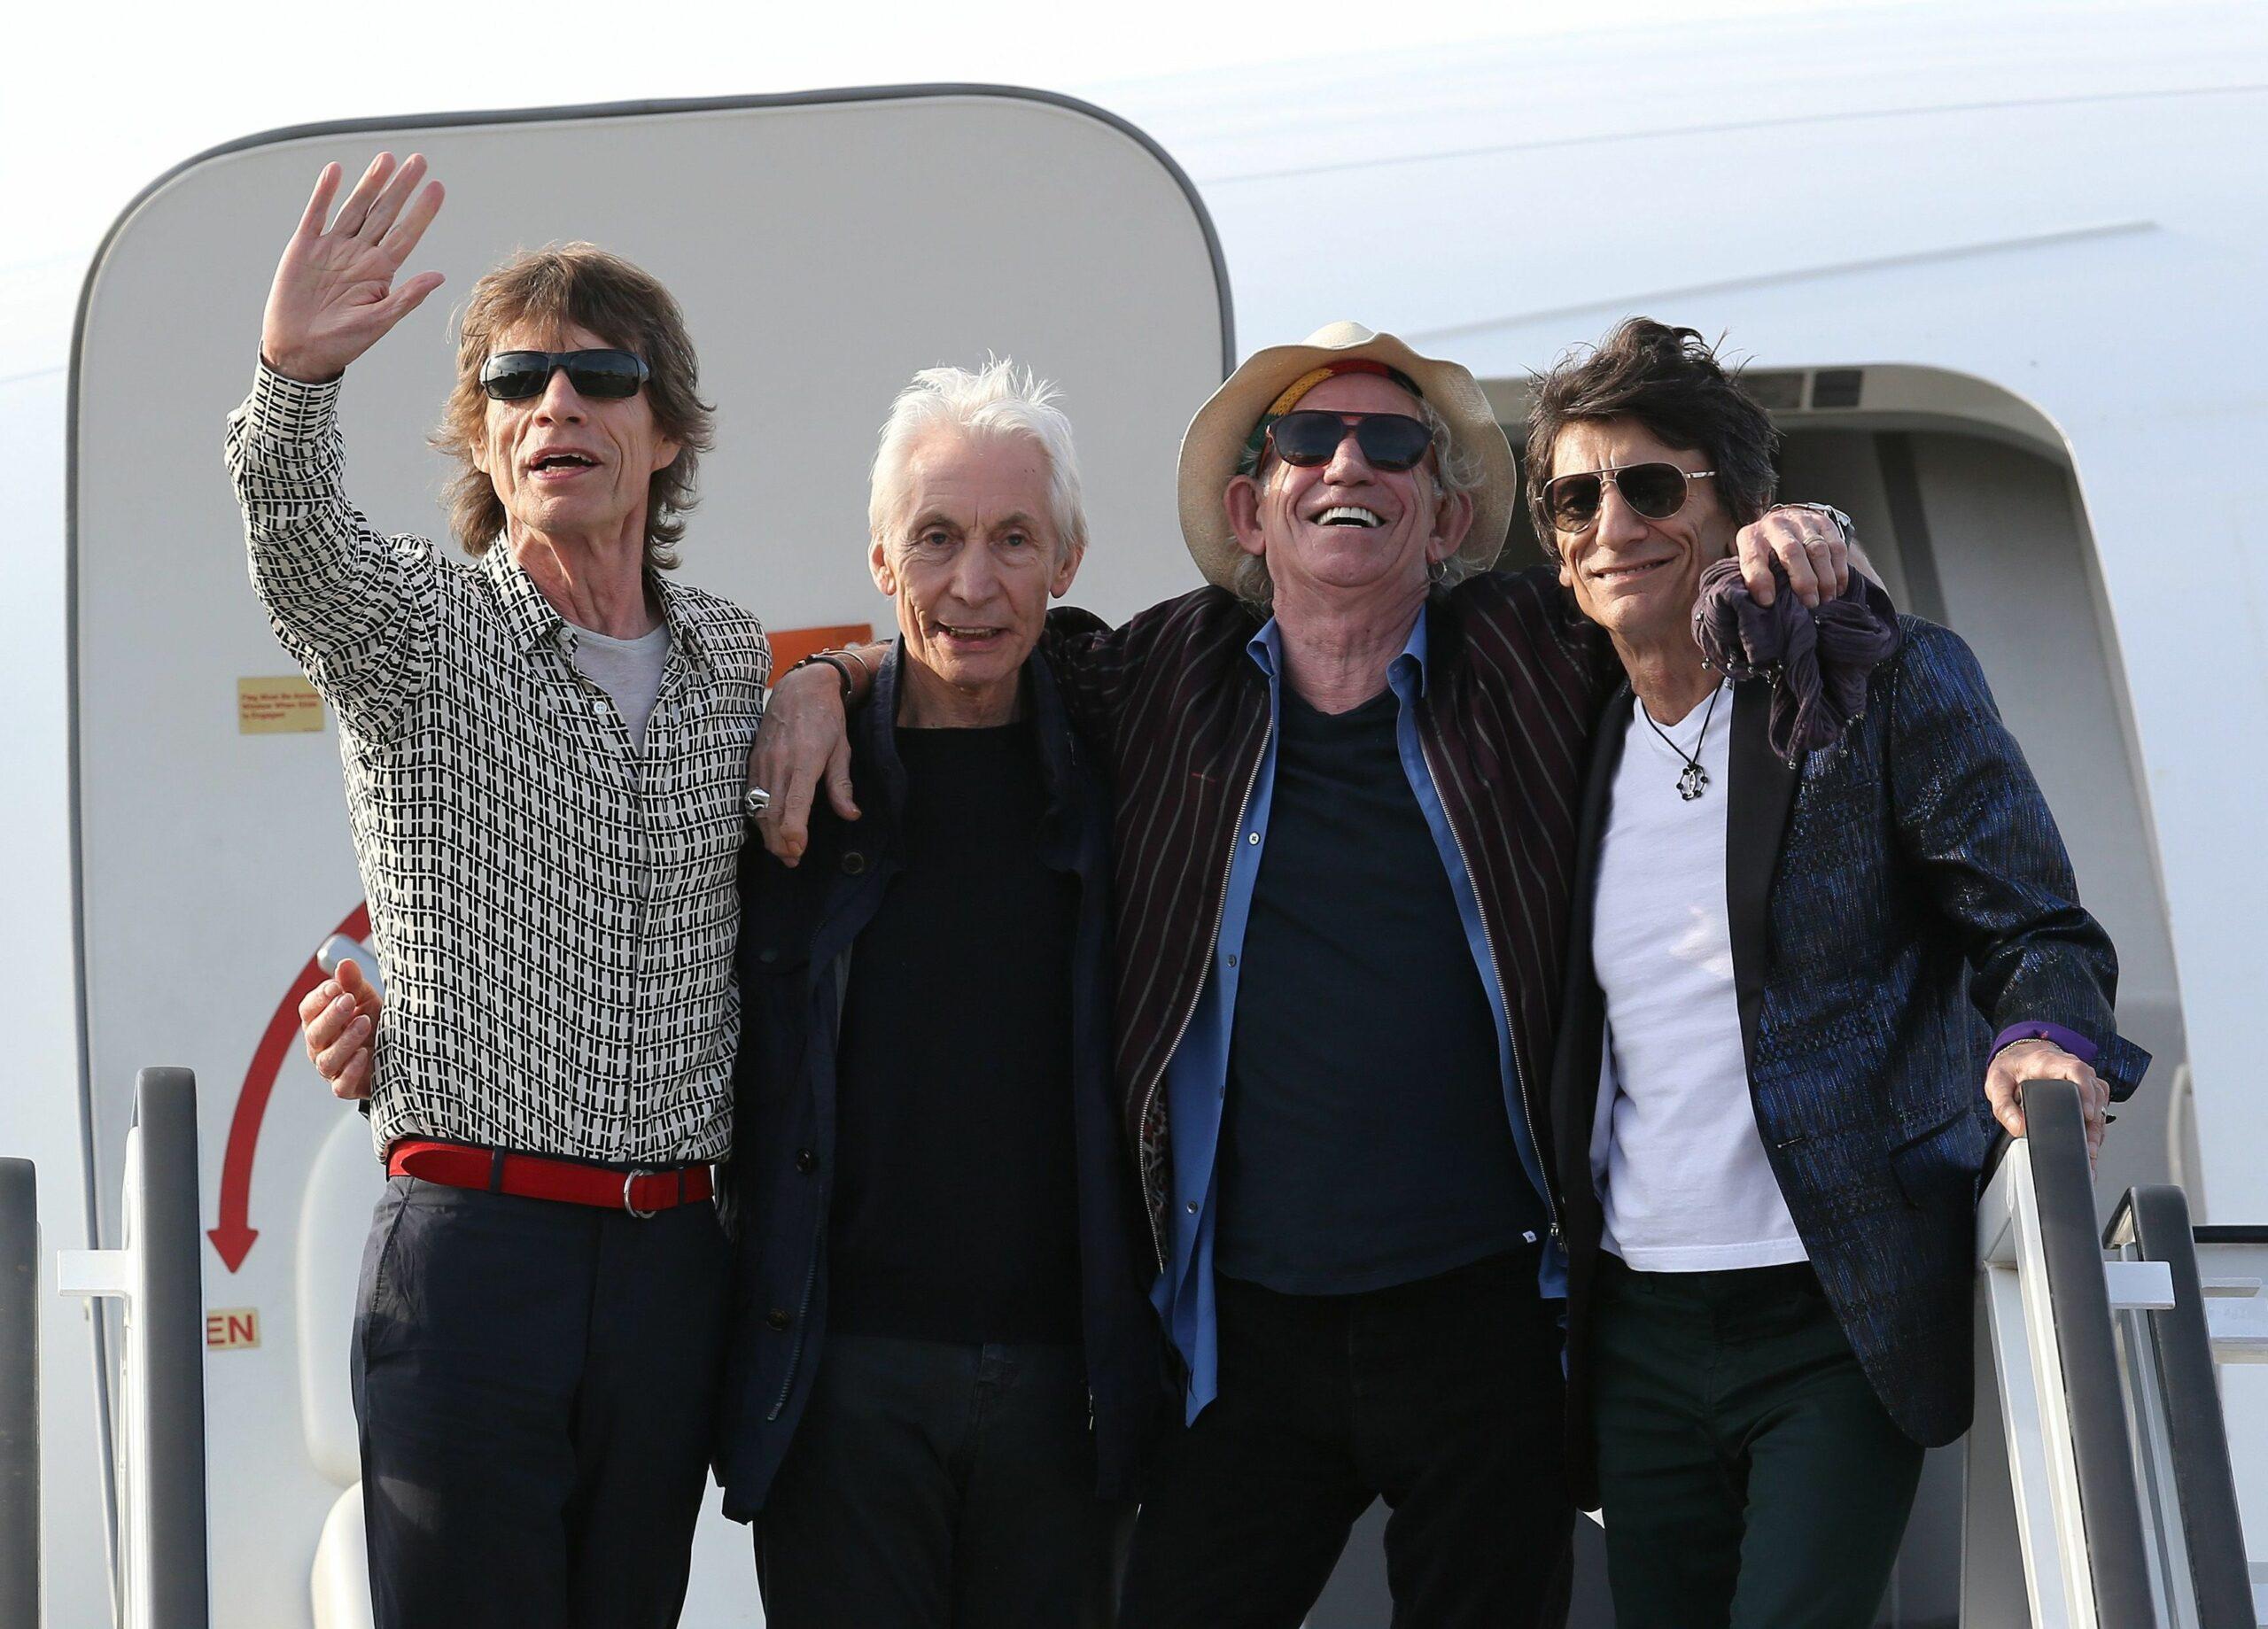 Mick Jagger with The Rolling Stones arrive in Havana, Cuba